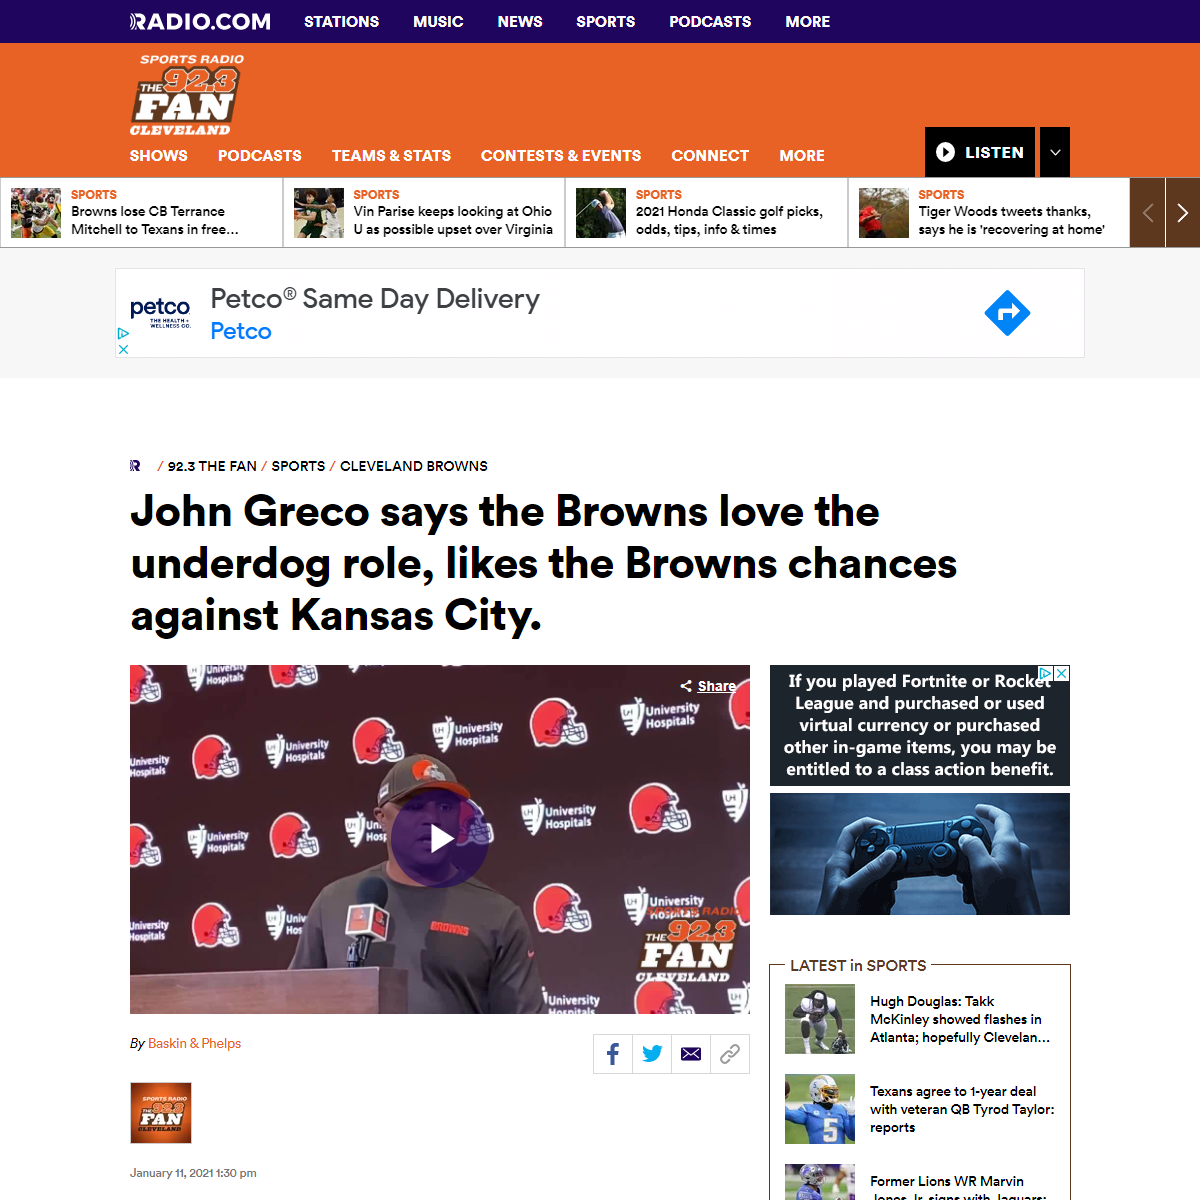 A complete backup of https://www.radio.com/923thefan/sports/cleveland-browns/john-greco-says-he-likes-browns-chances-against-kan